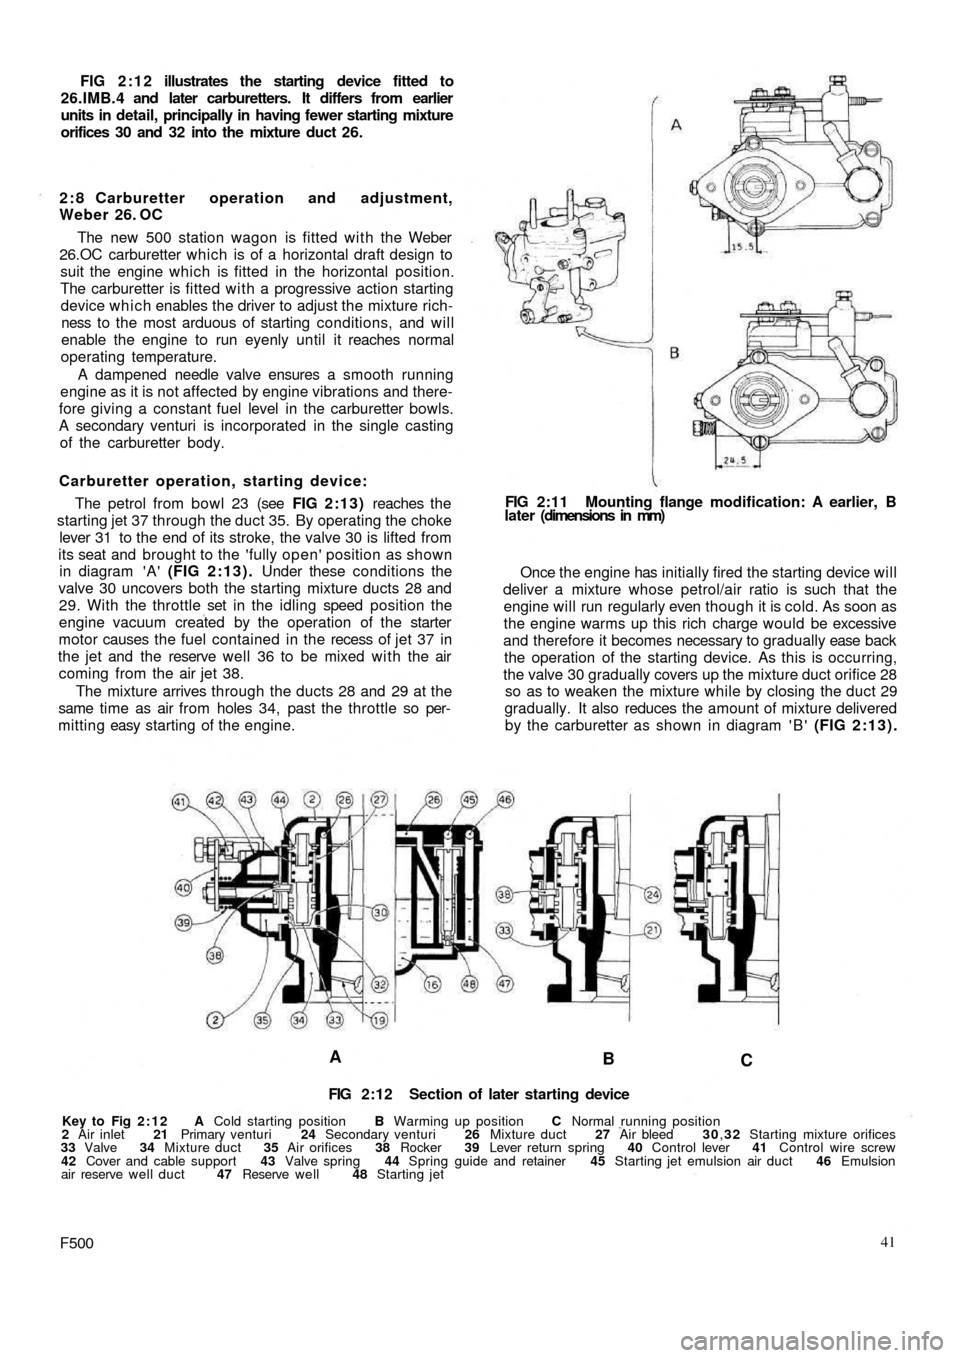 FIAT 500 1969 1.G Workshop Manual FIG 2:12 illustrates the starting device fitted to
26.IMB.4 and later carburetters. It differs from earlier
units in detail, principally in having fewer starting mixture
orifices 30 and 32 into the mi